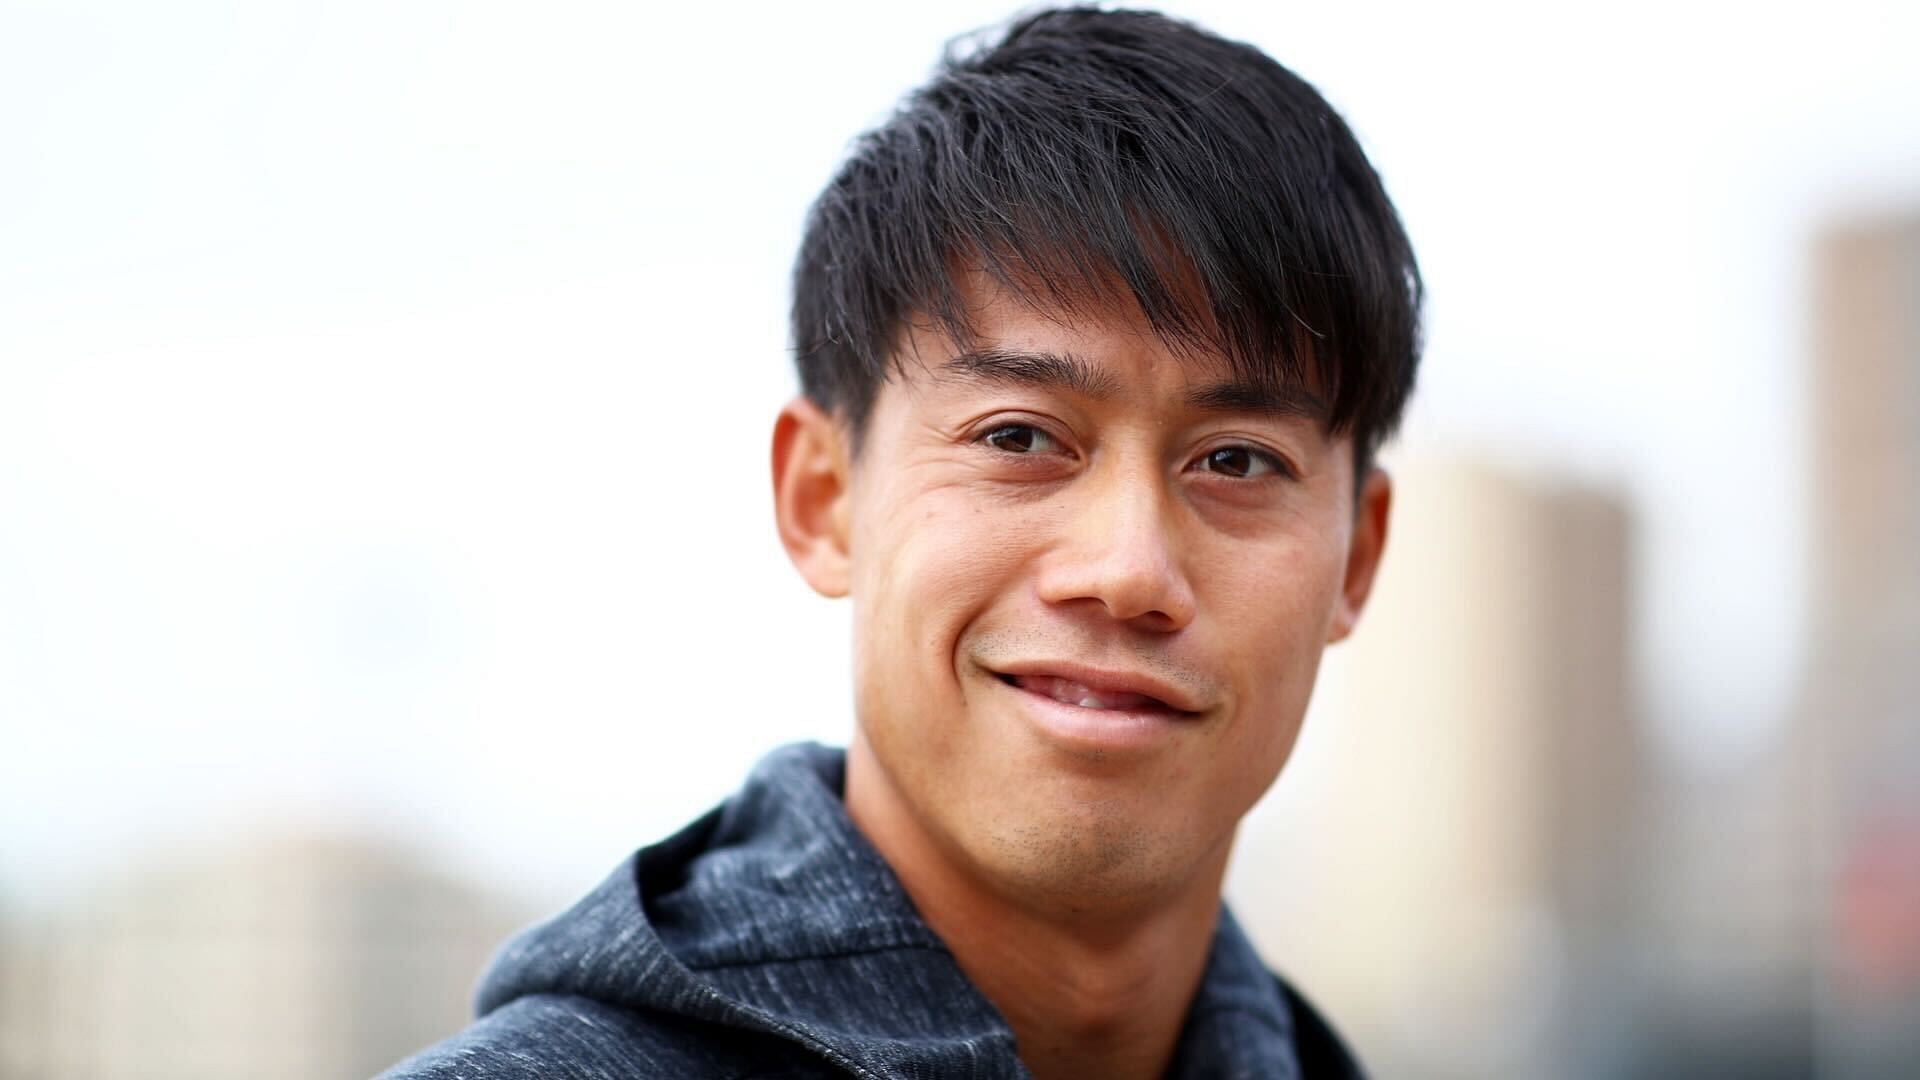 Kei Nishikori returned to action after almost two years.